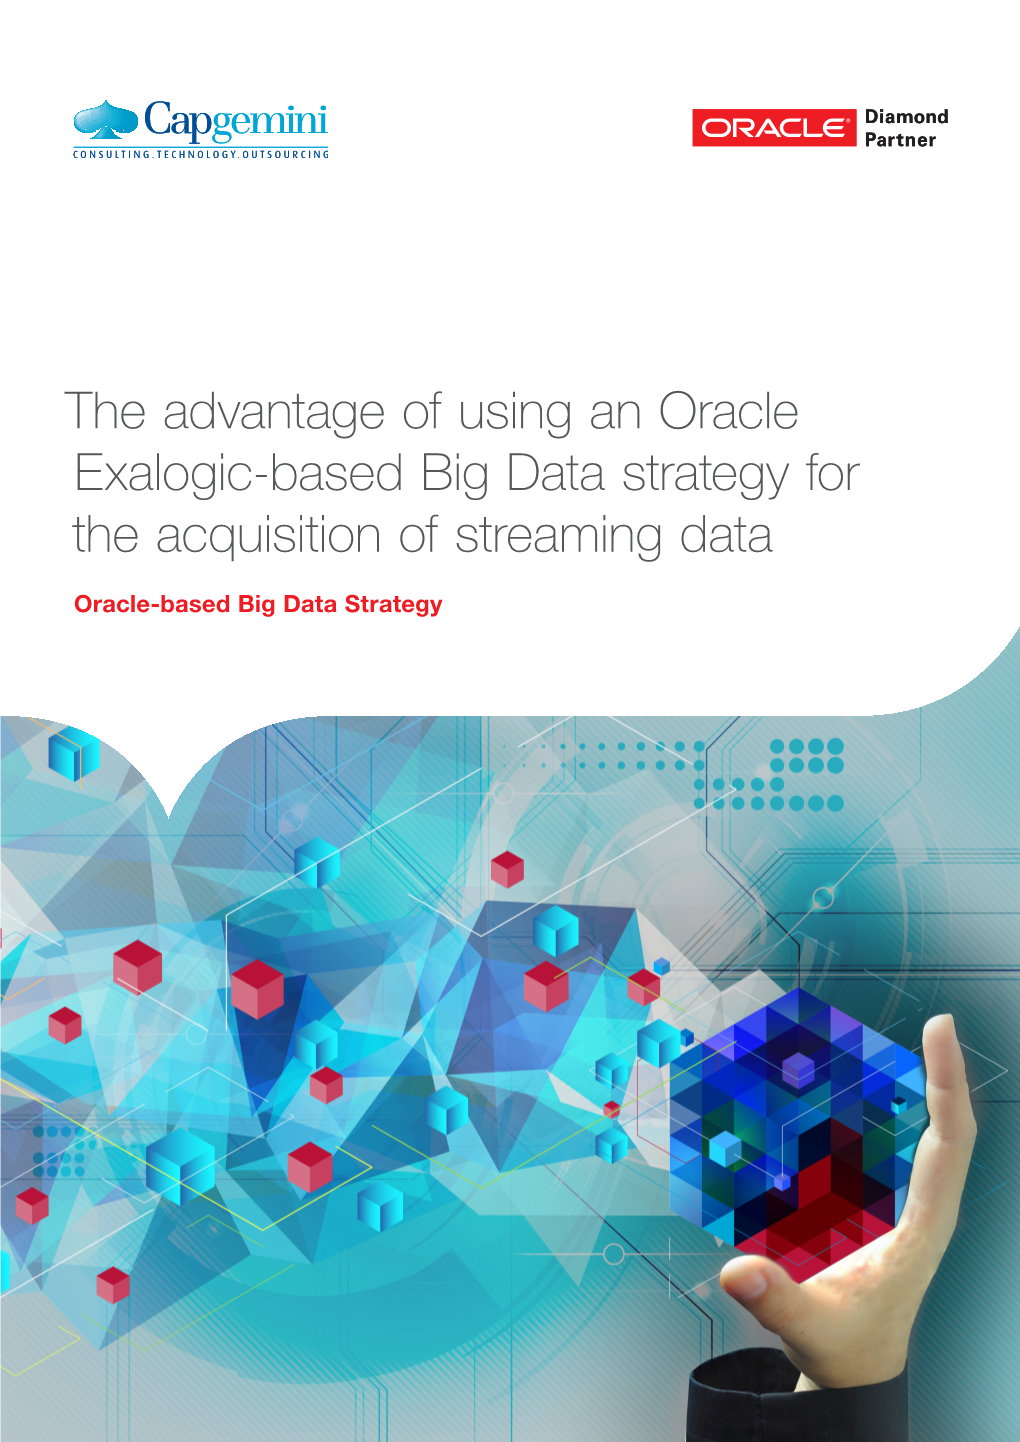 The Advantage of Using an Oracle Exalogic-Based Big Data Strategy for the Acquisition of Streaming Data